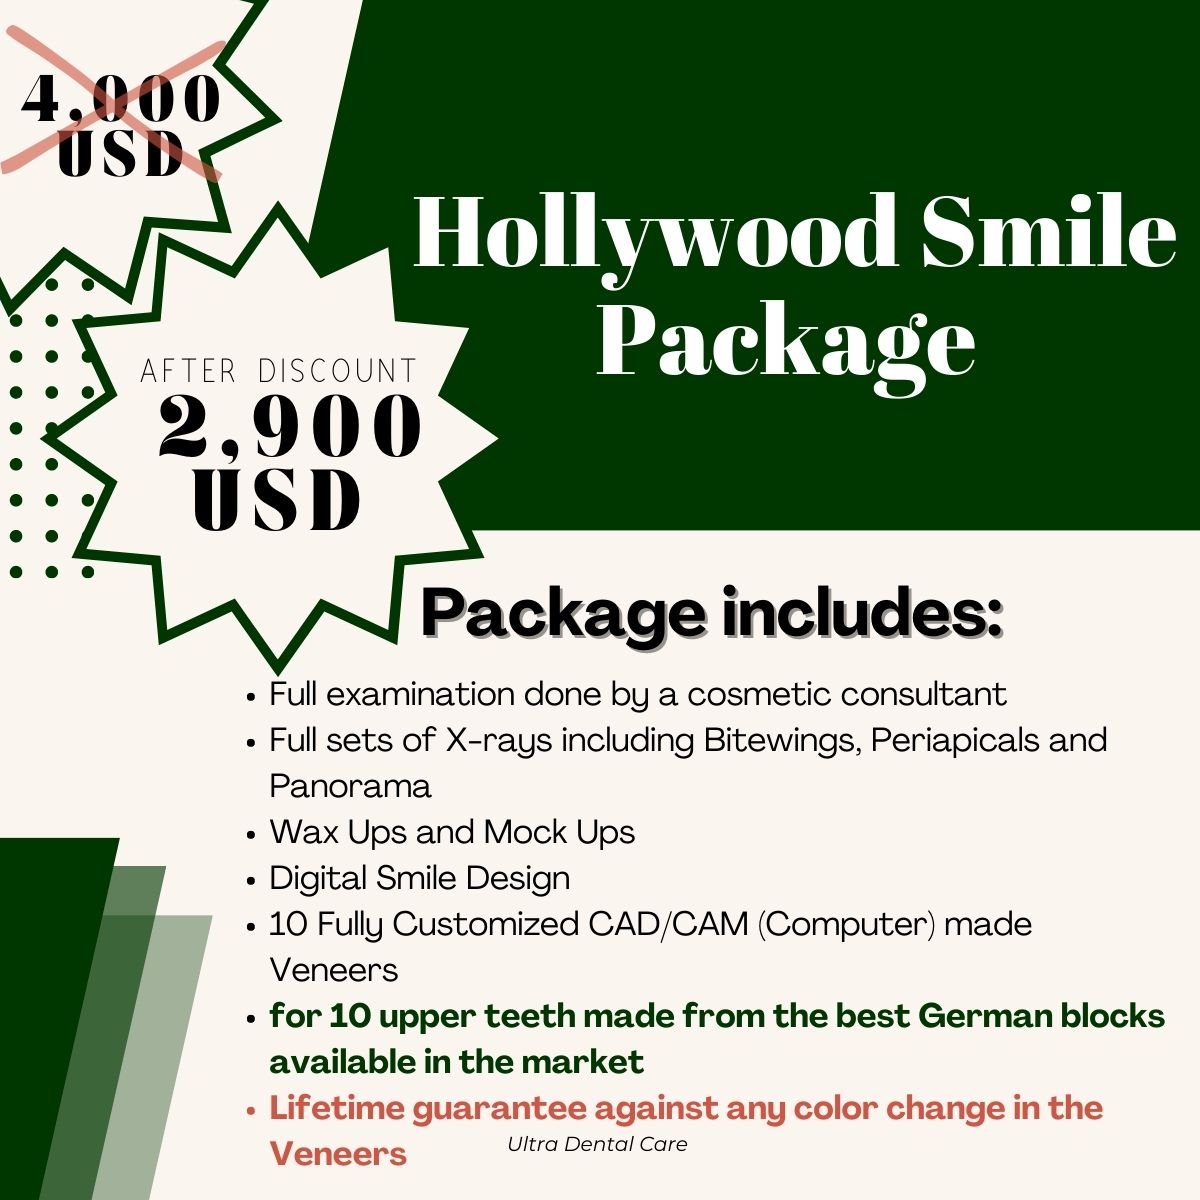 Hollywood Smile Package